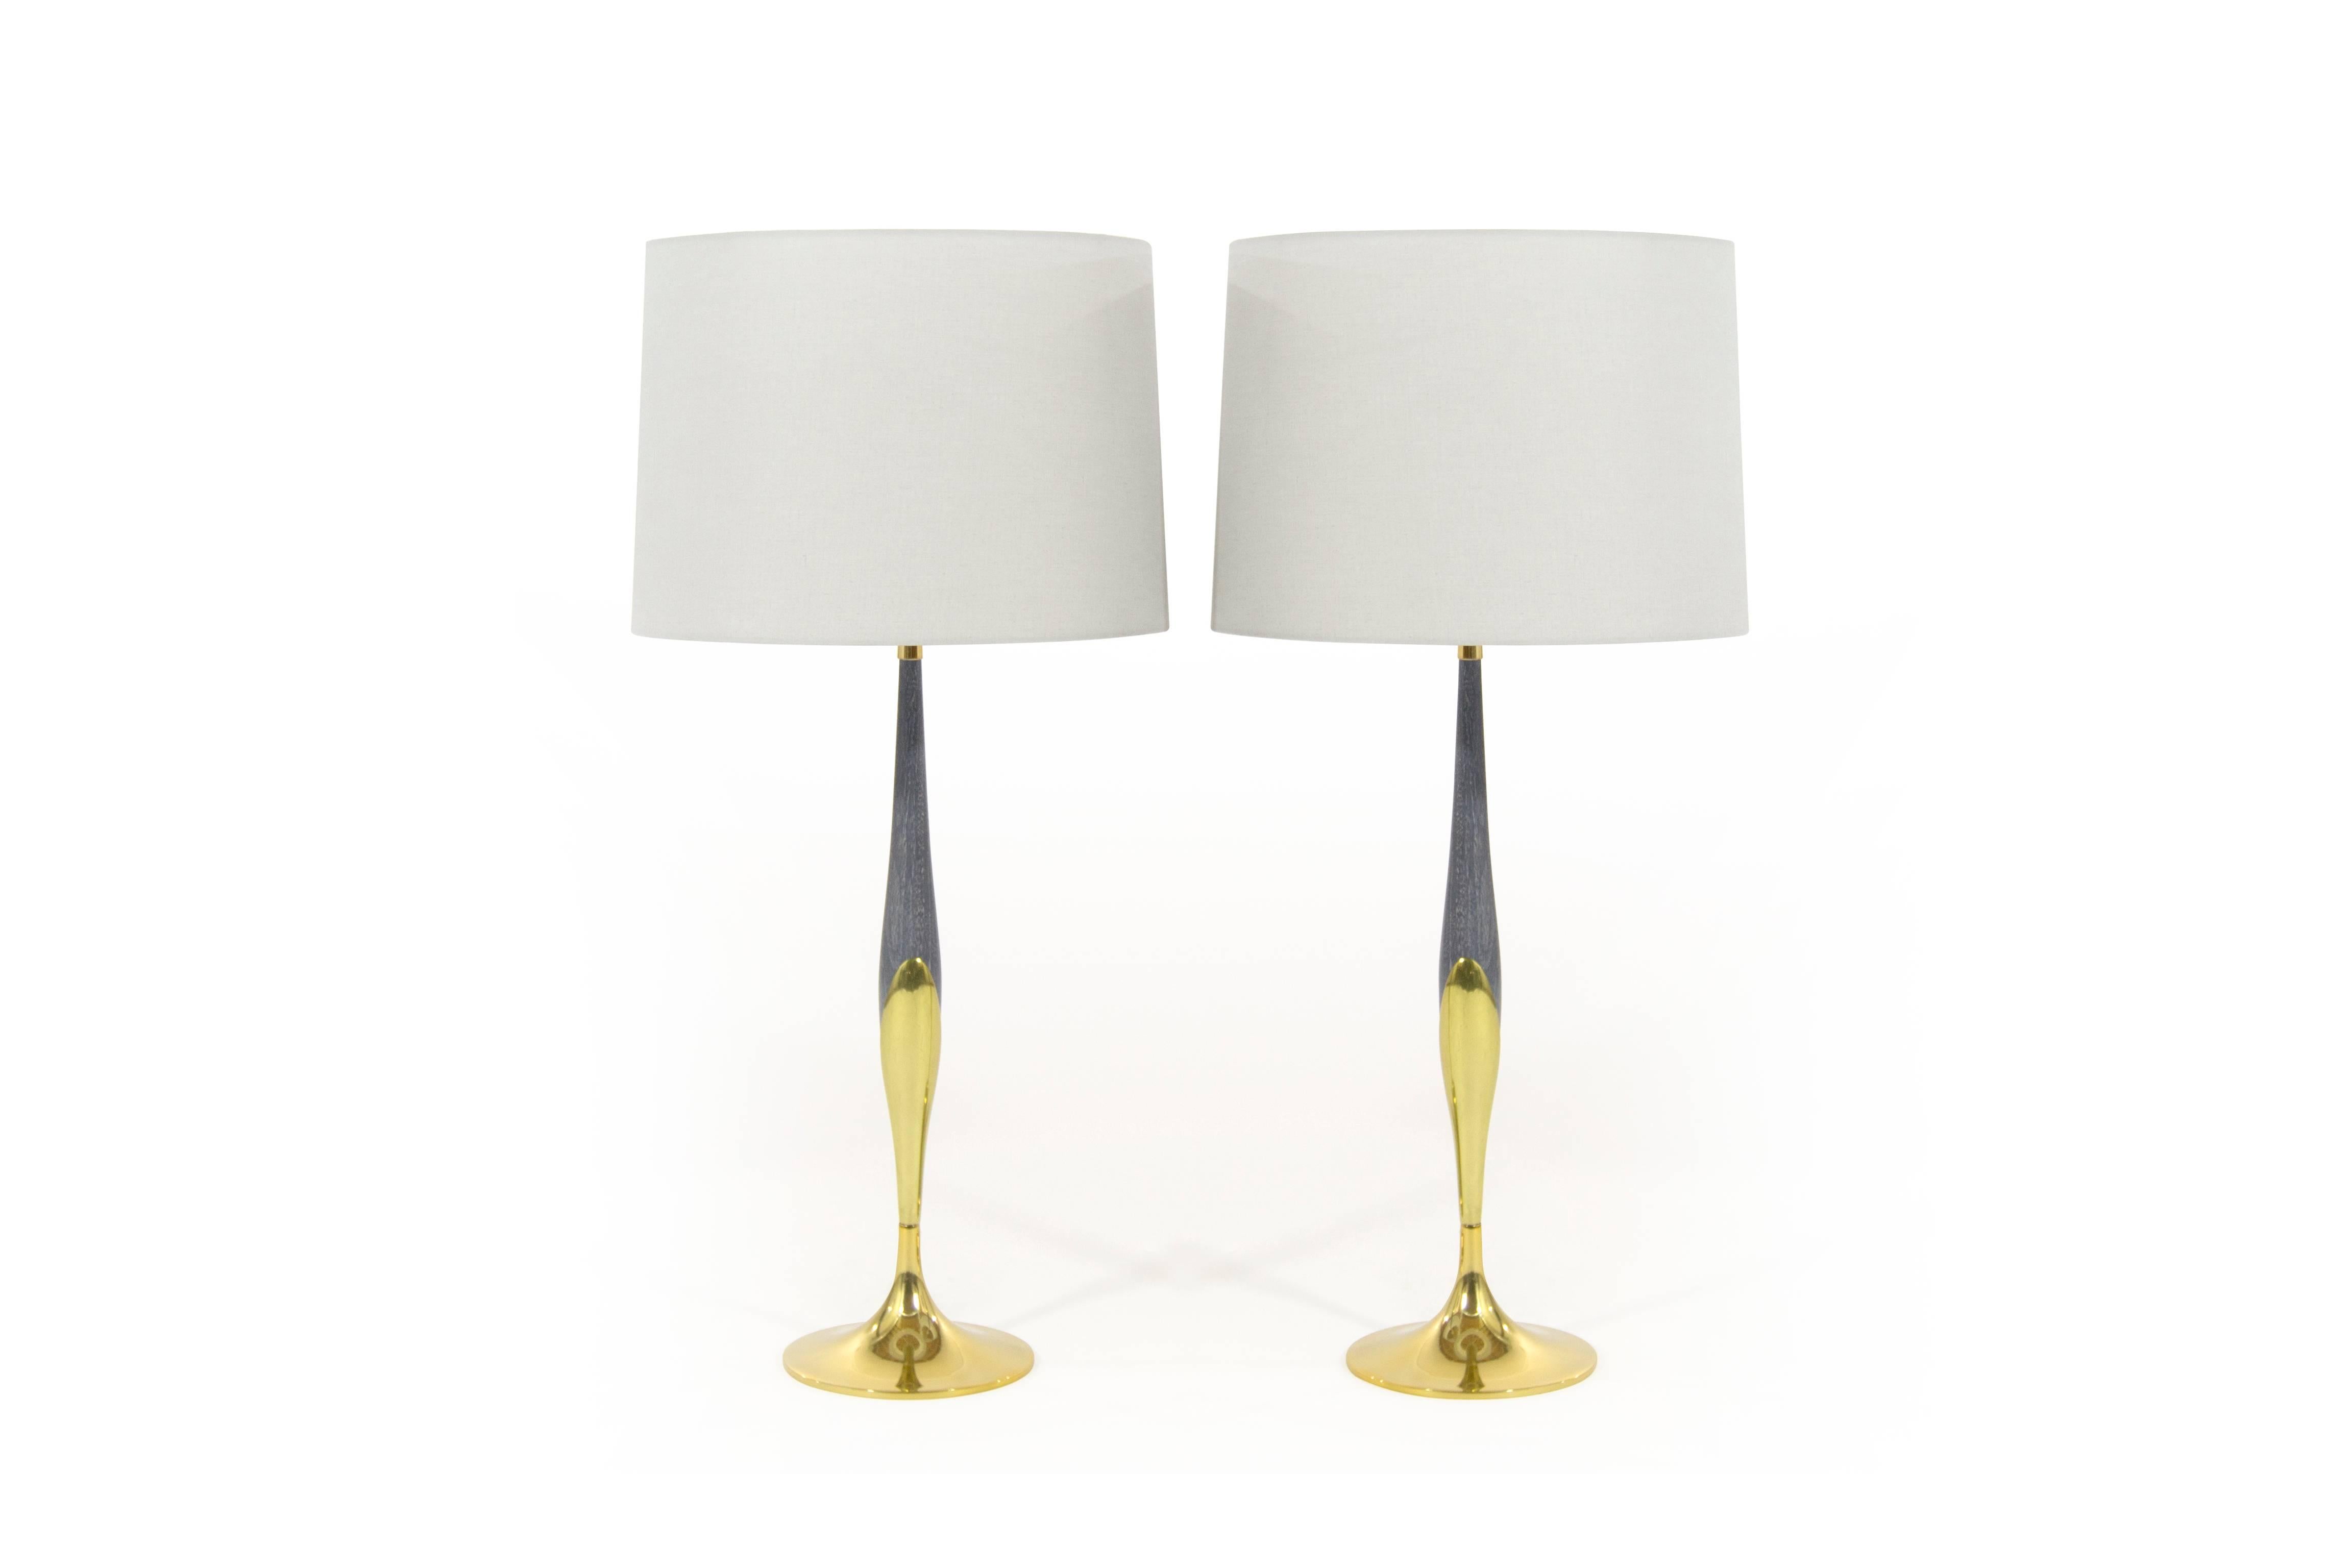 Pair of sculptural table lamps by Laurel, brass newly polished, wood newly redone in grey ceruse, complimented beautifully by light grey linen shades.